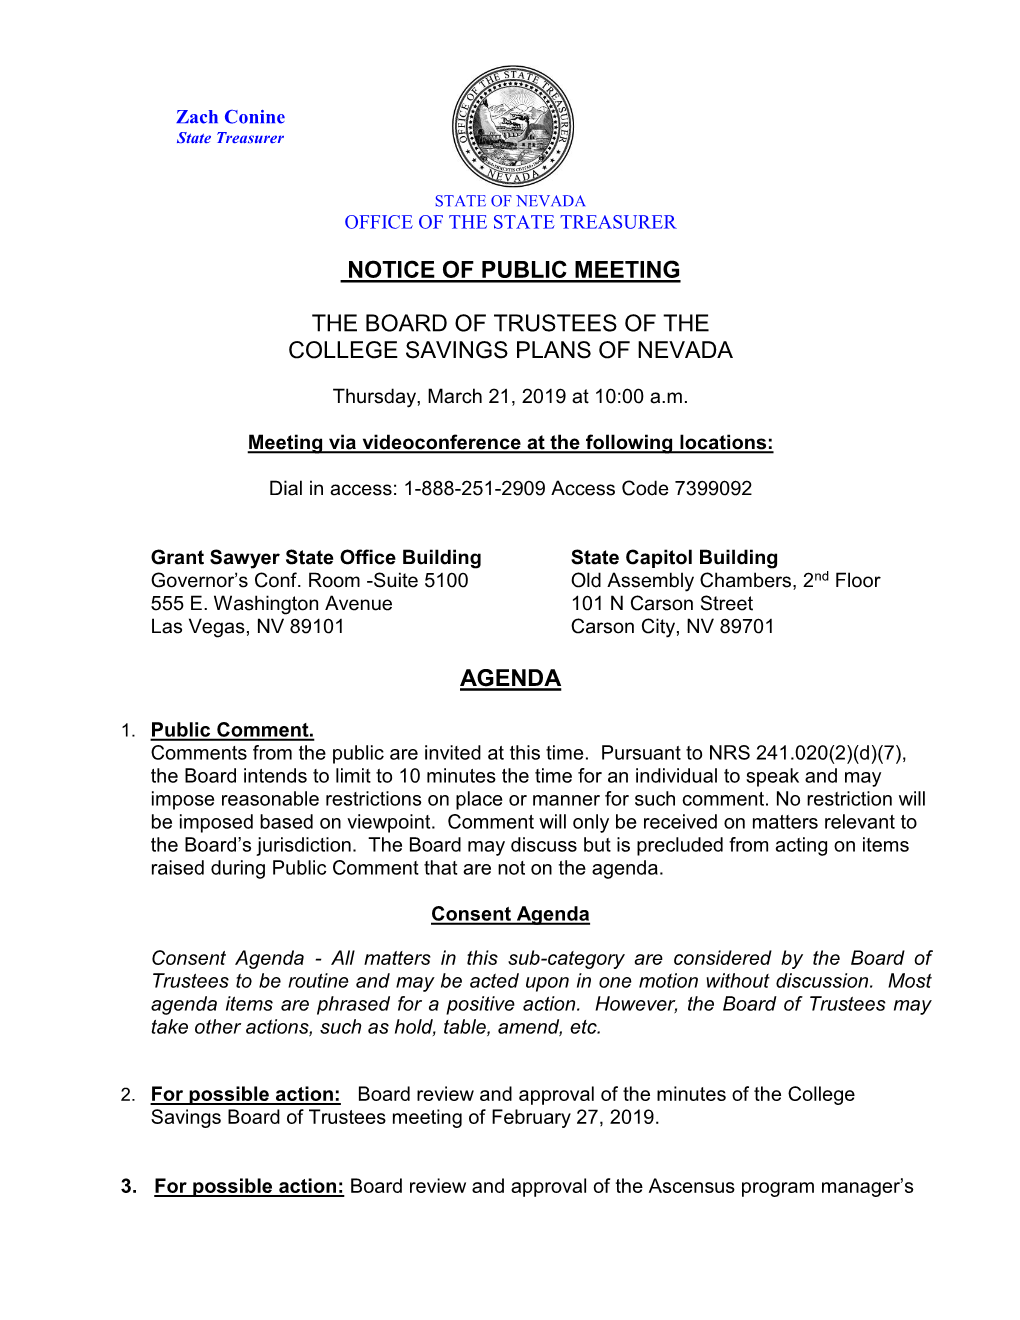 Notice of Public Meeting the Board of Trustees of the College Savings Plans of Nevada Agenda